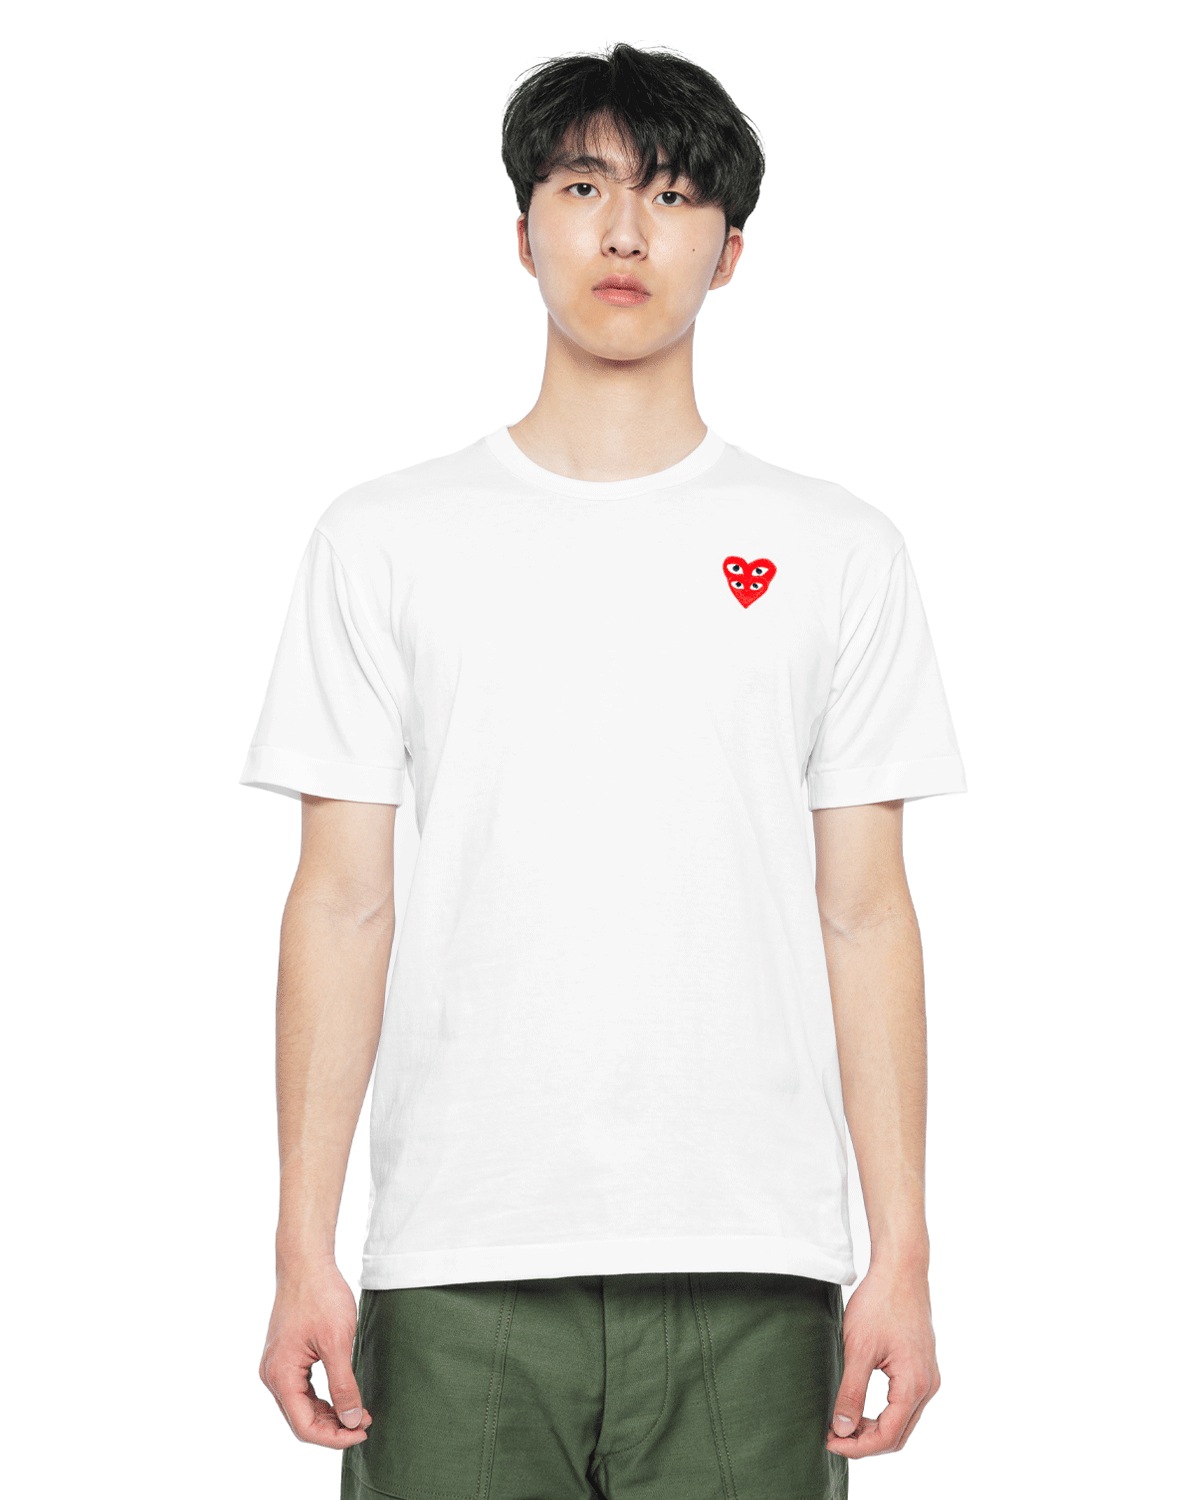 Comme Des Garcons PLAY Mens Eyes Heart T-Shirt Red - Polyvore  Luxury  brands fashion, Mens luxury fashion, Comme des garcons